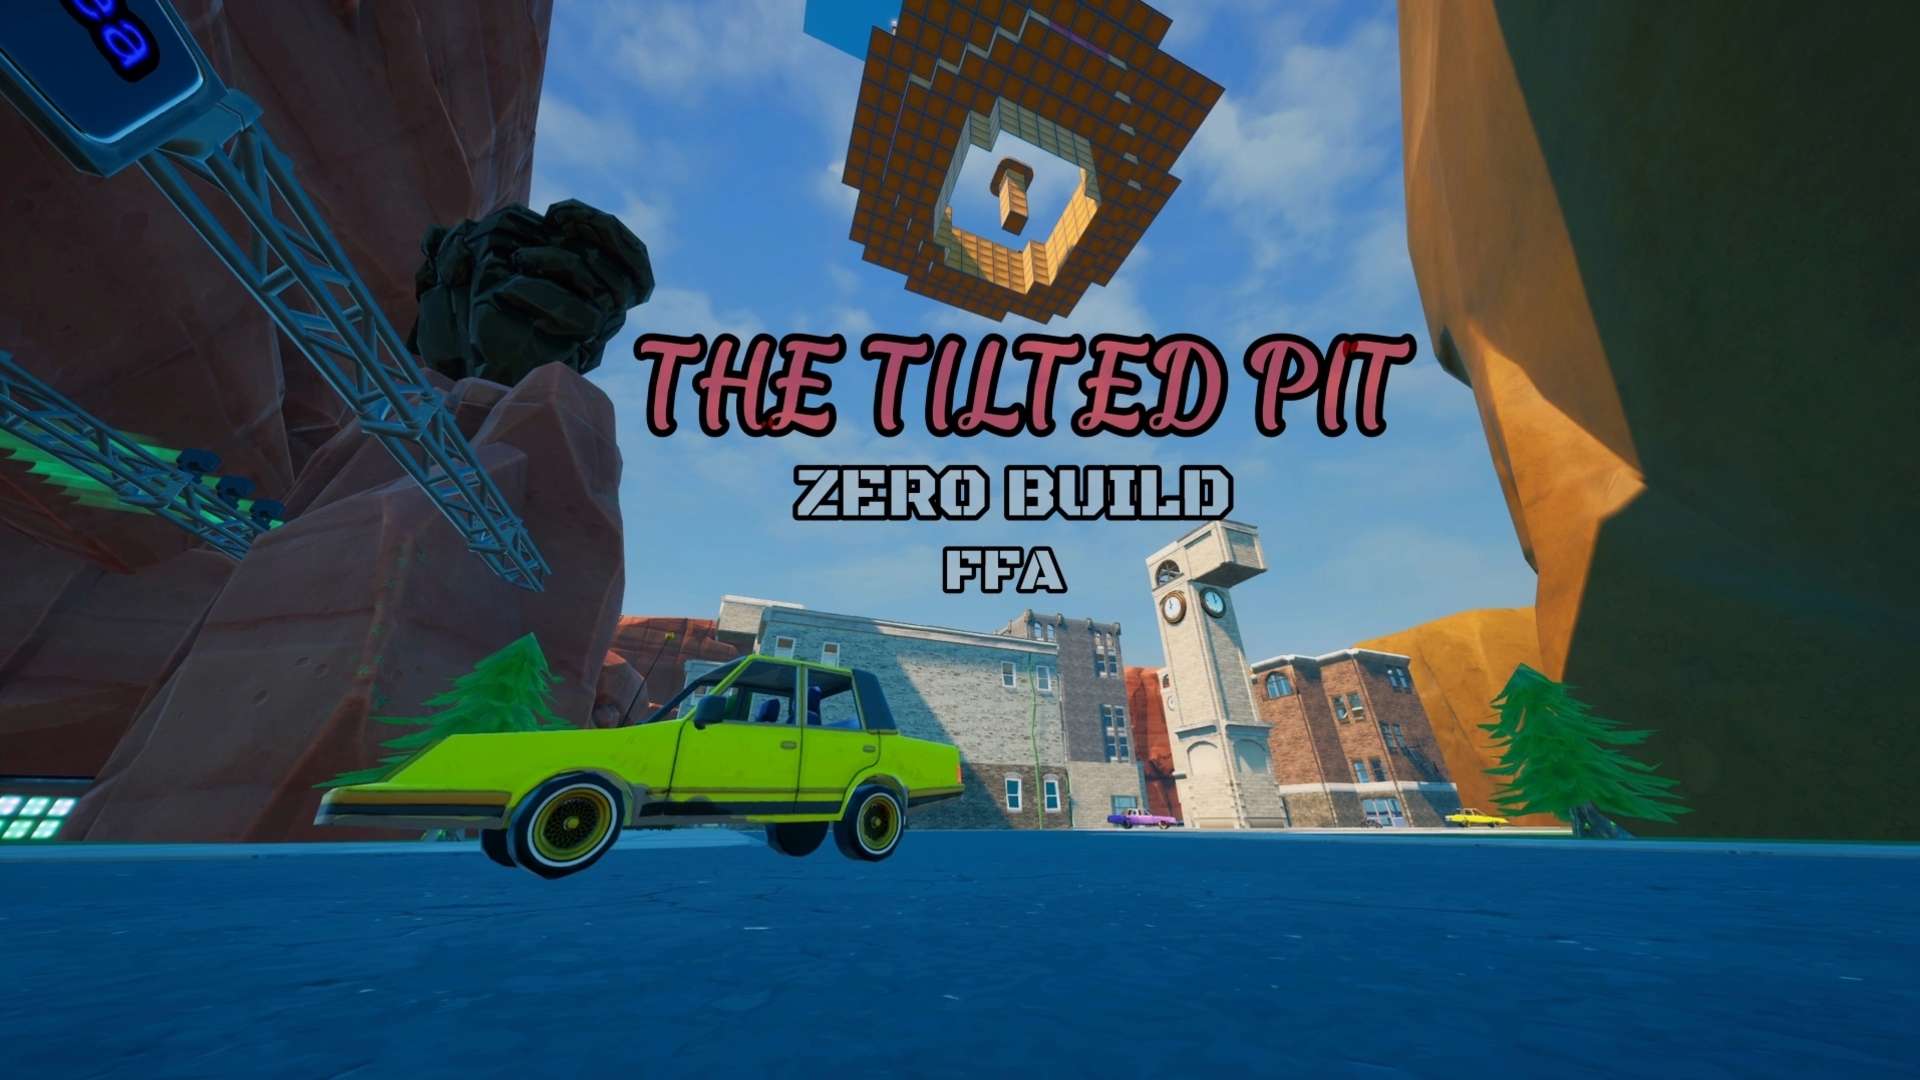 The Tilted Pit Zero build